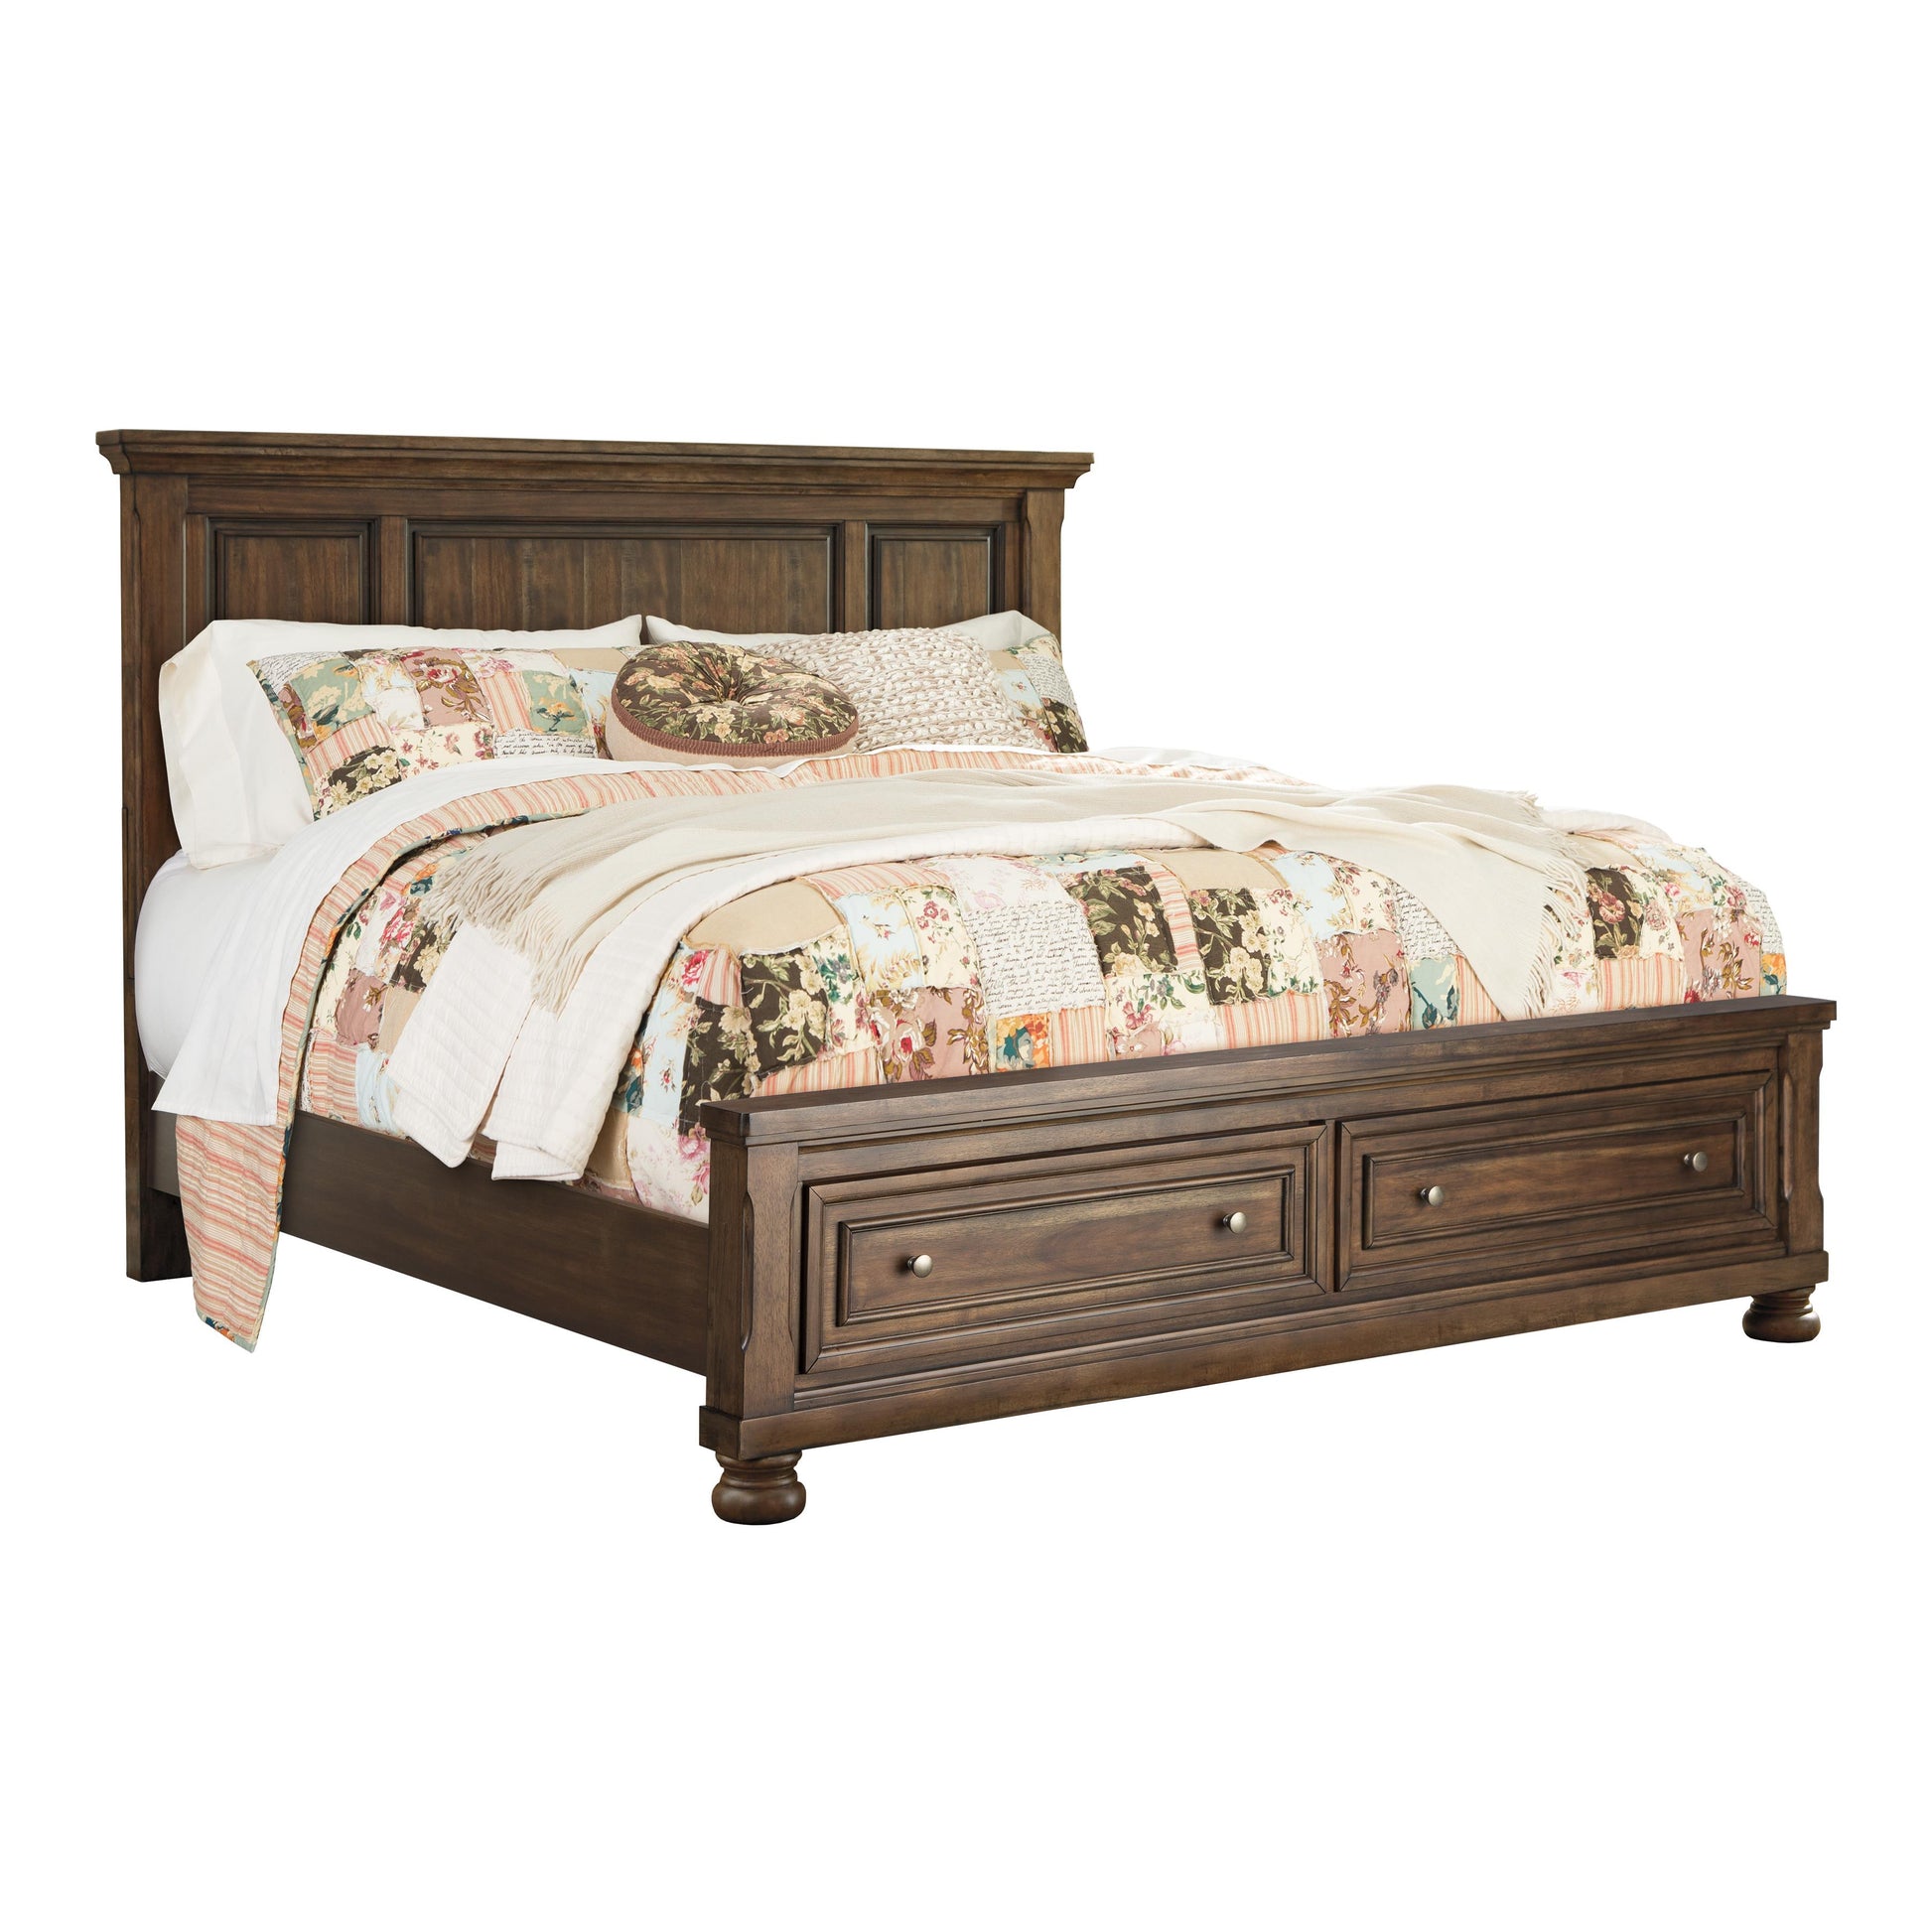 Signature Design by Ashley Flynnter Queen Panel Bed with Storage B719-57/B719-74/B719-98